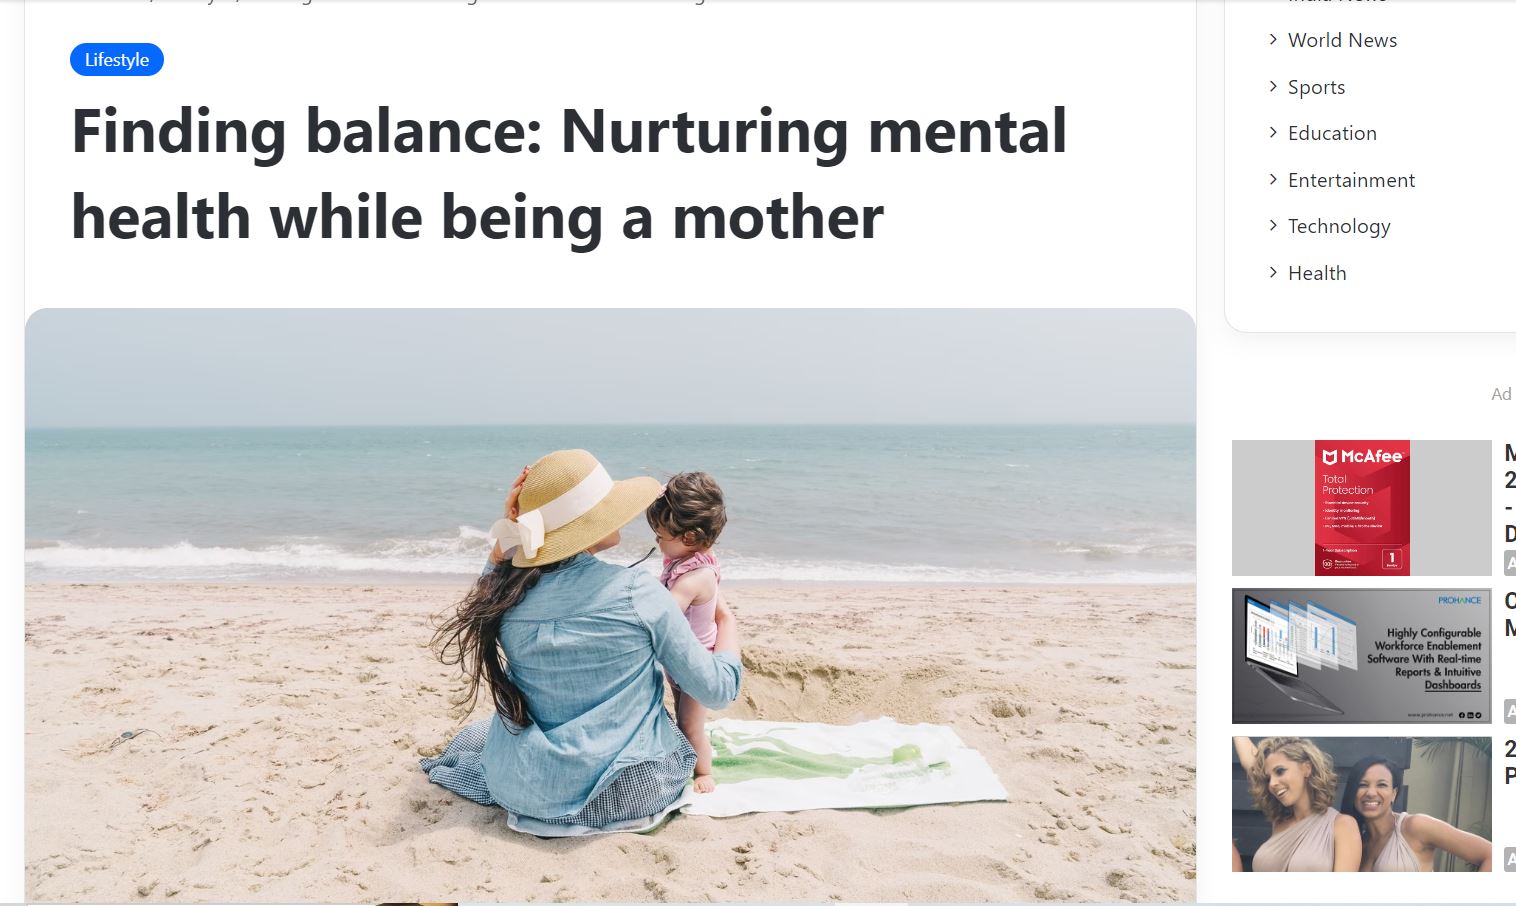 Nurturing mental health while being a mother